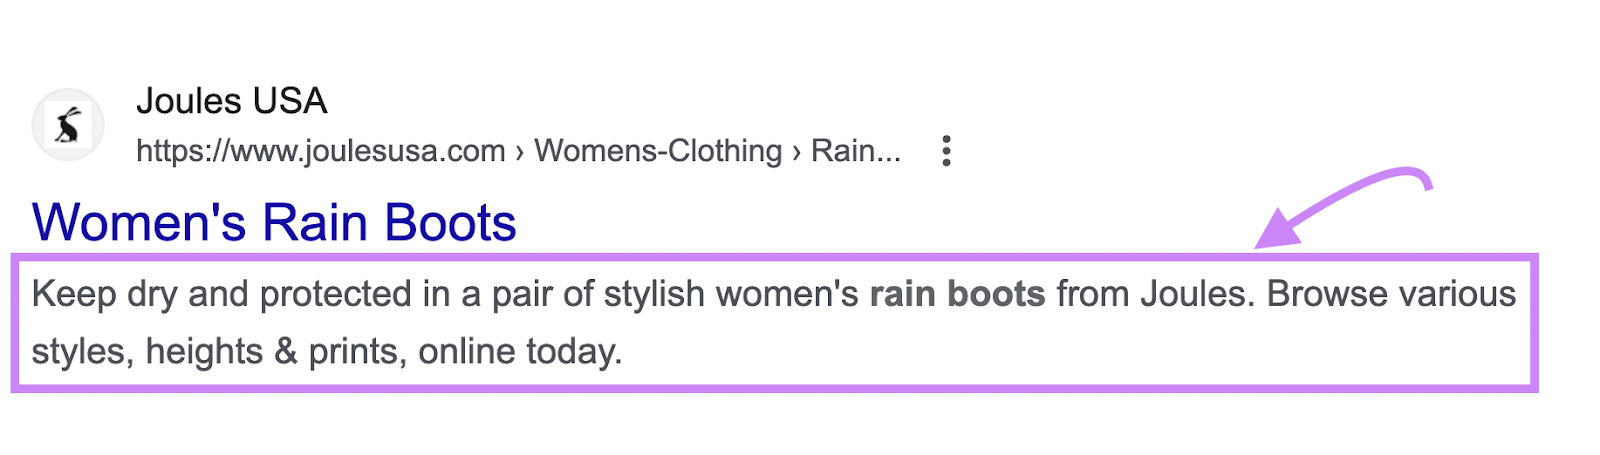 A meta description on SERP that reads "Keep dry and protected in a pair of stylish women's rain boots from Joules. Browse various styles, heights & prints, online today."